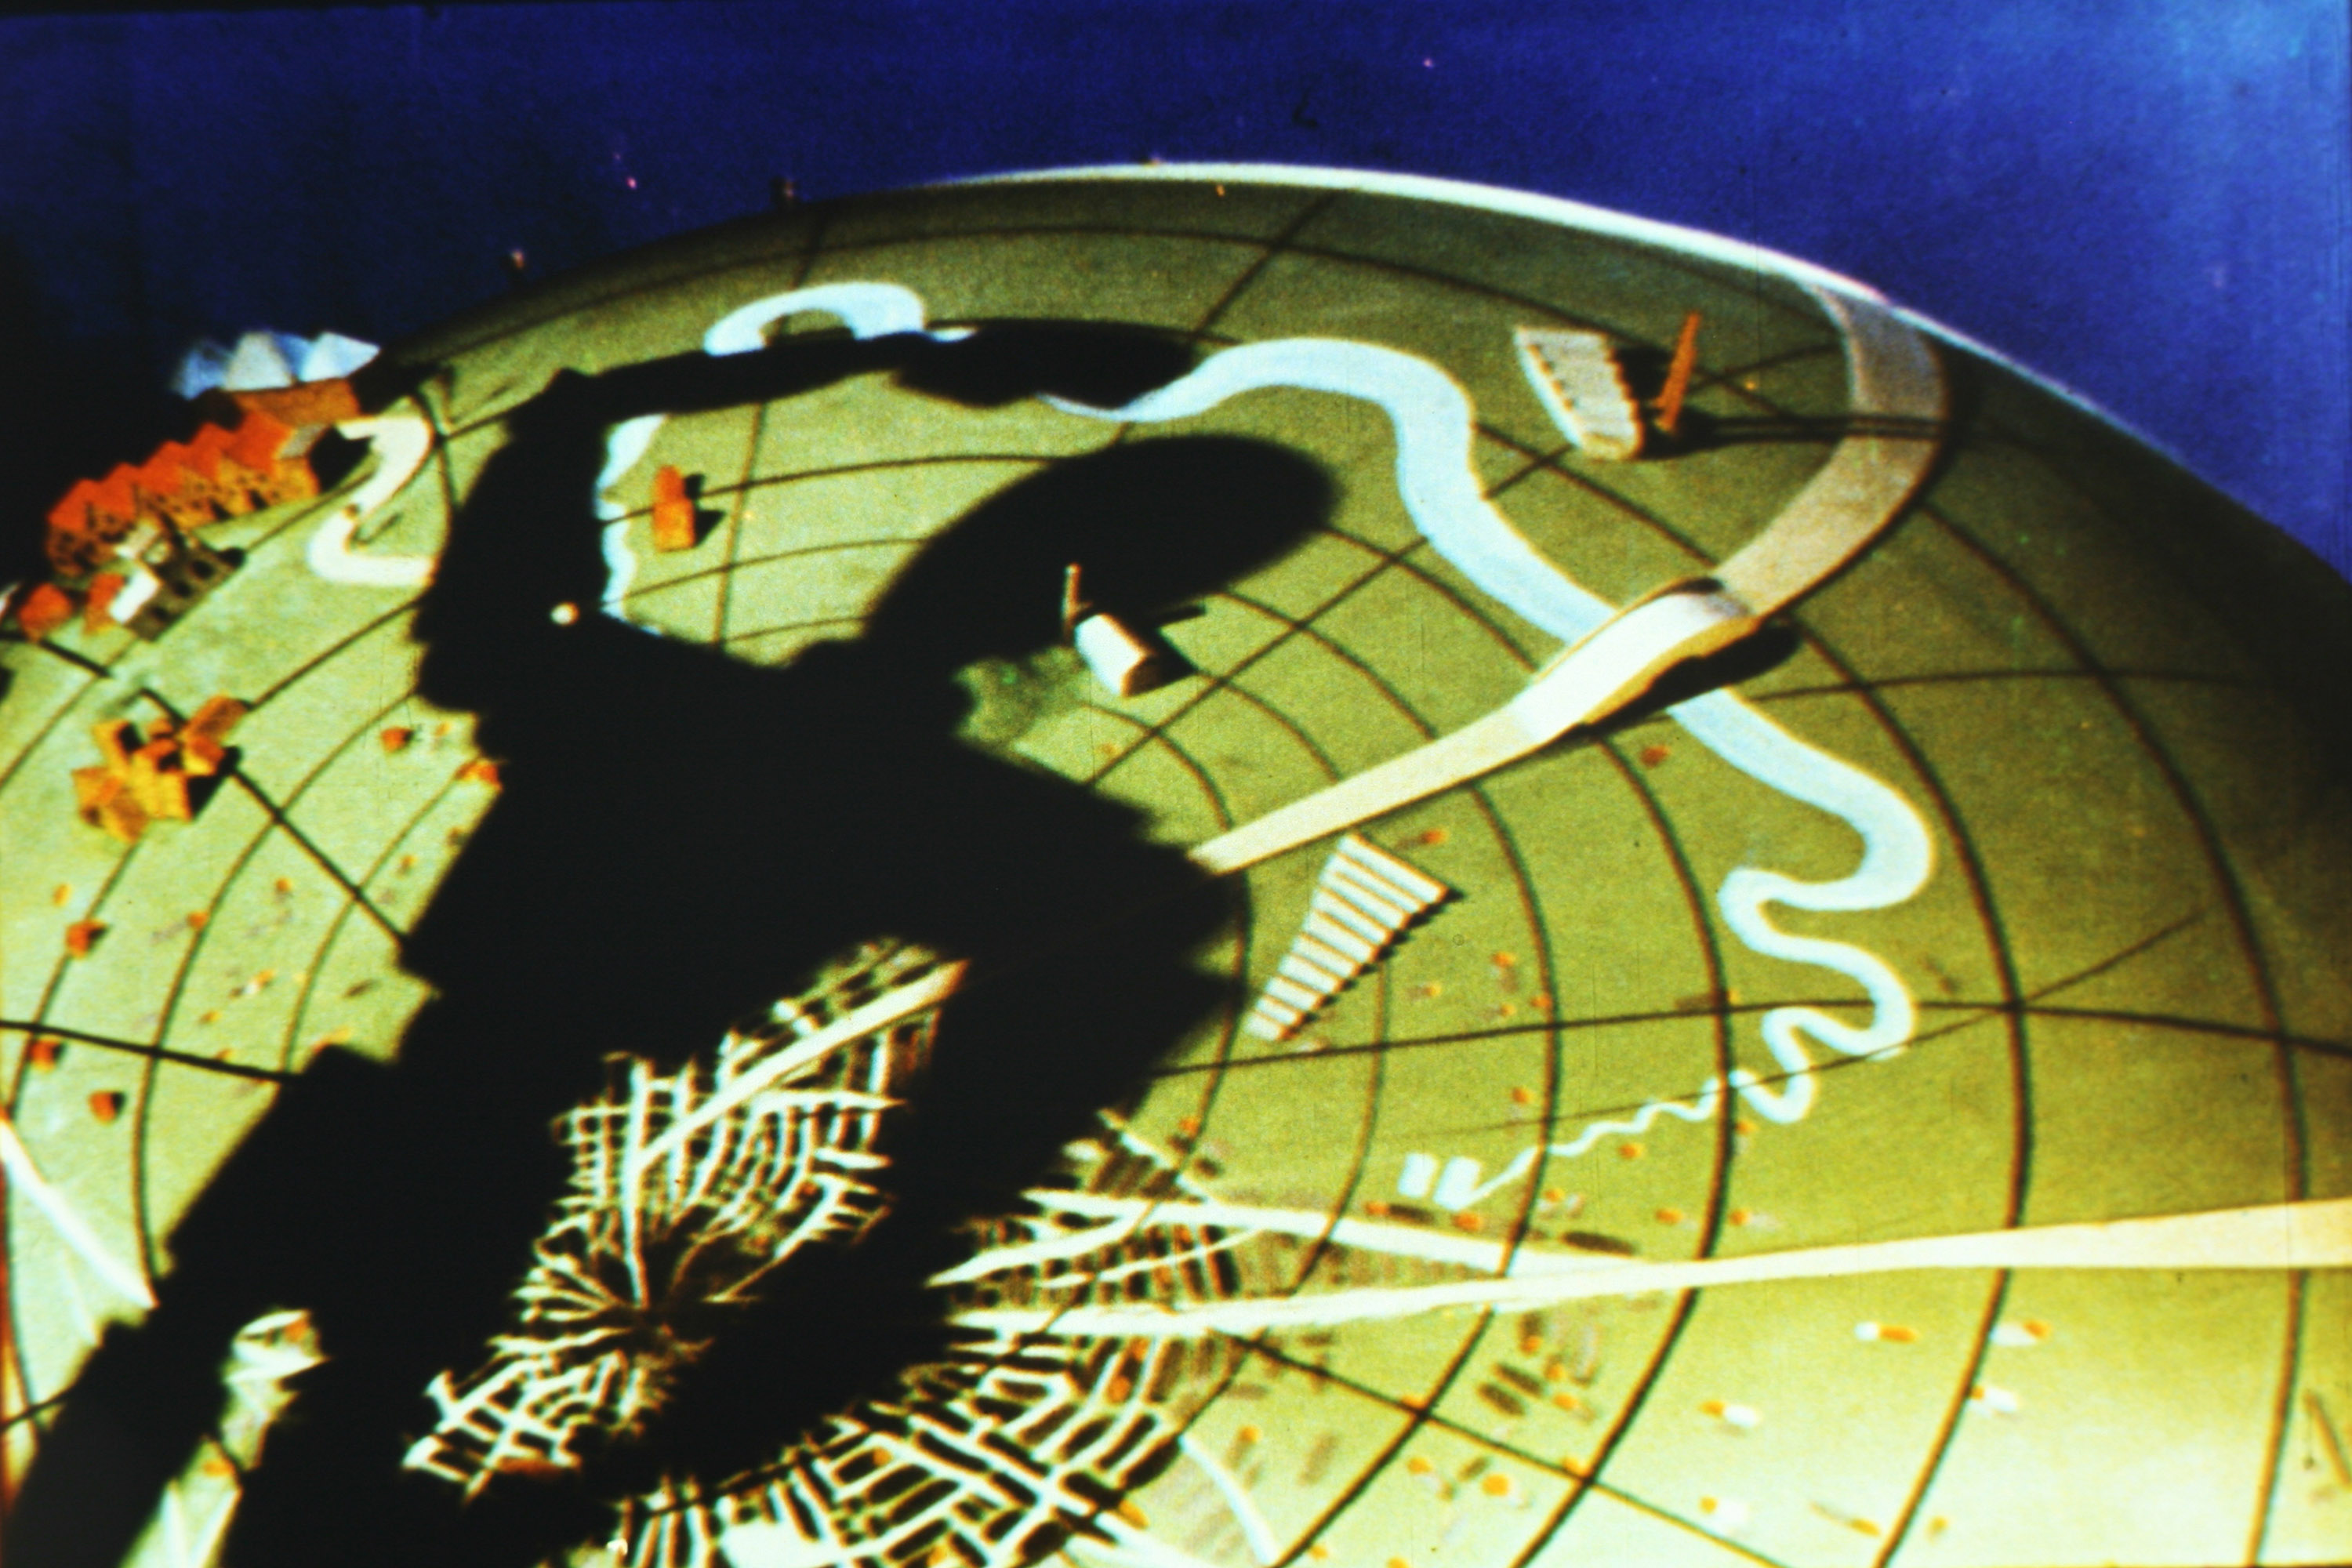 A film still from Len Lye's 1936 film birth of a robot, which shows the shadow of a robot falling over the globe.